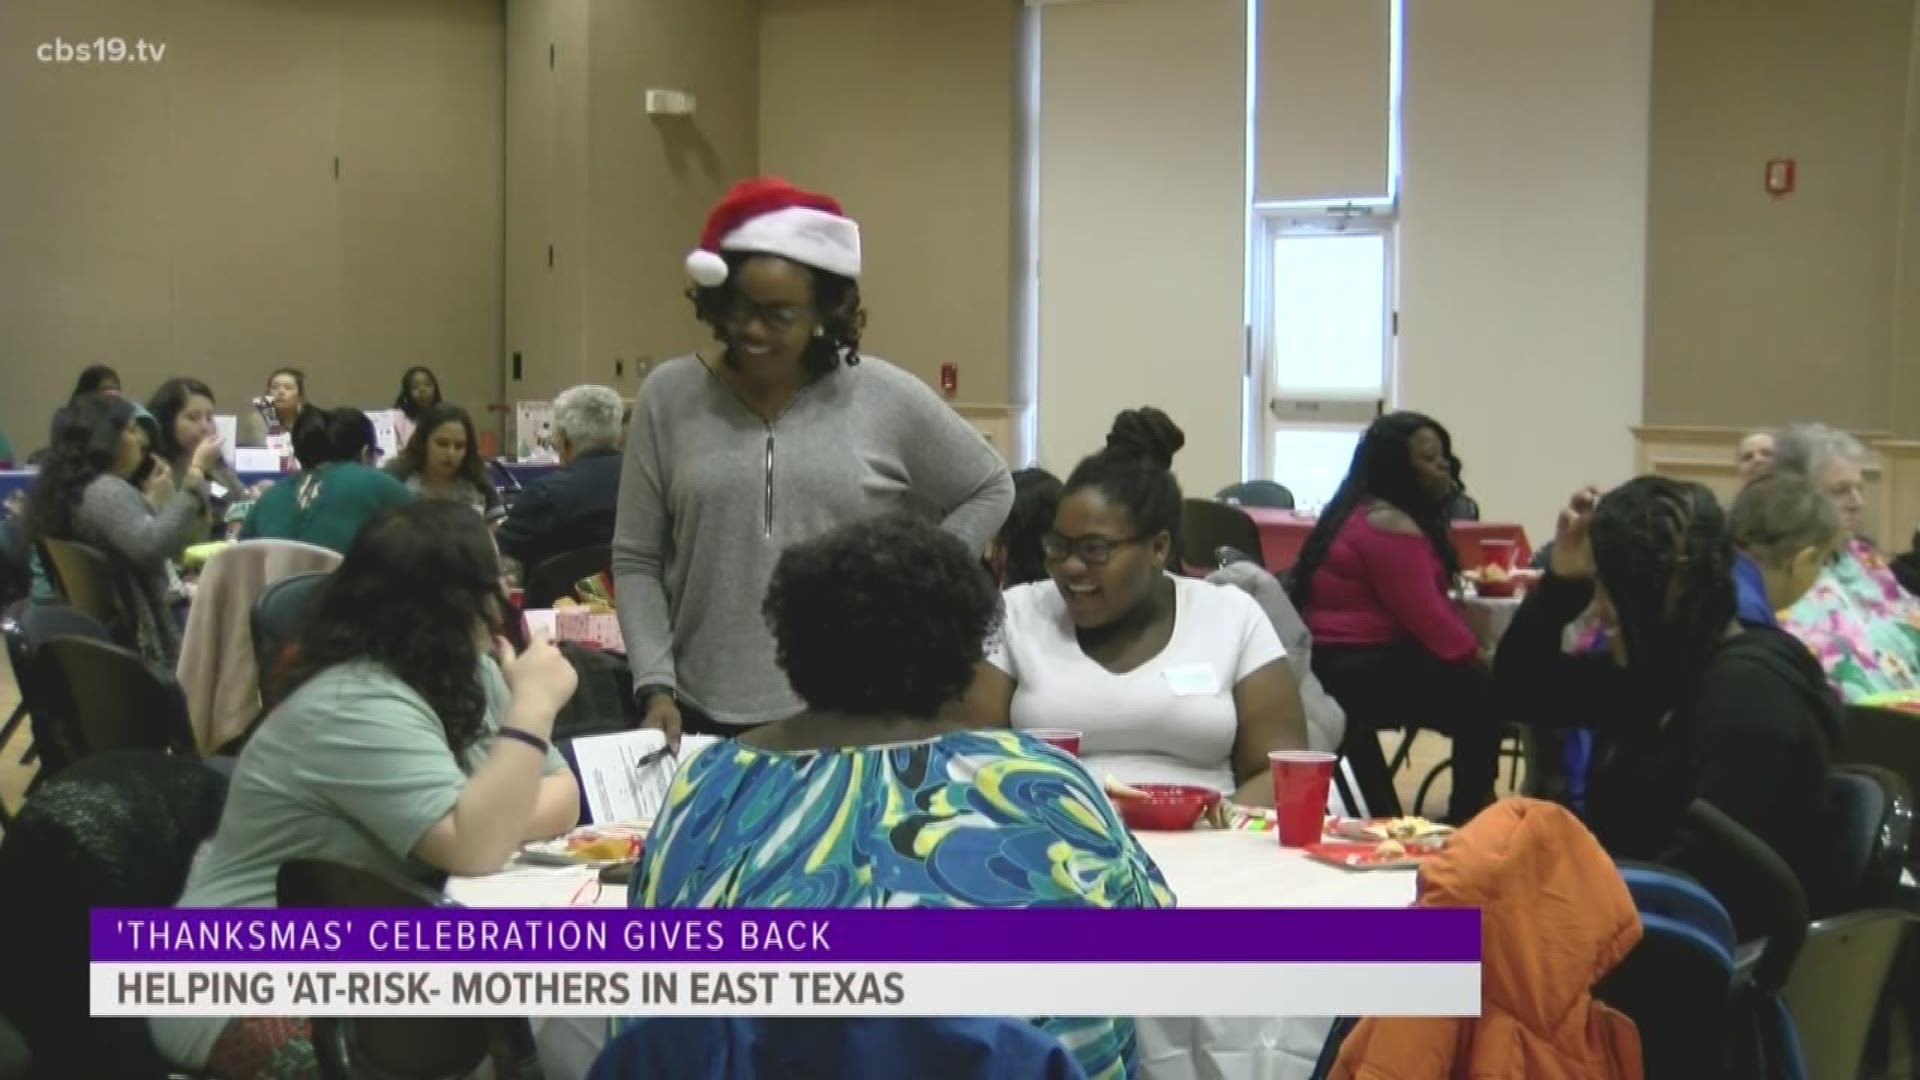 An East Texas organization helps local at-risk mothers.